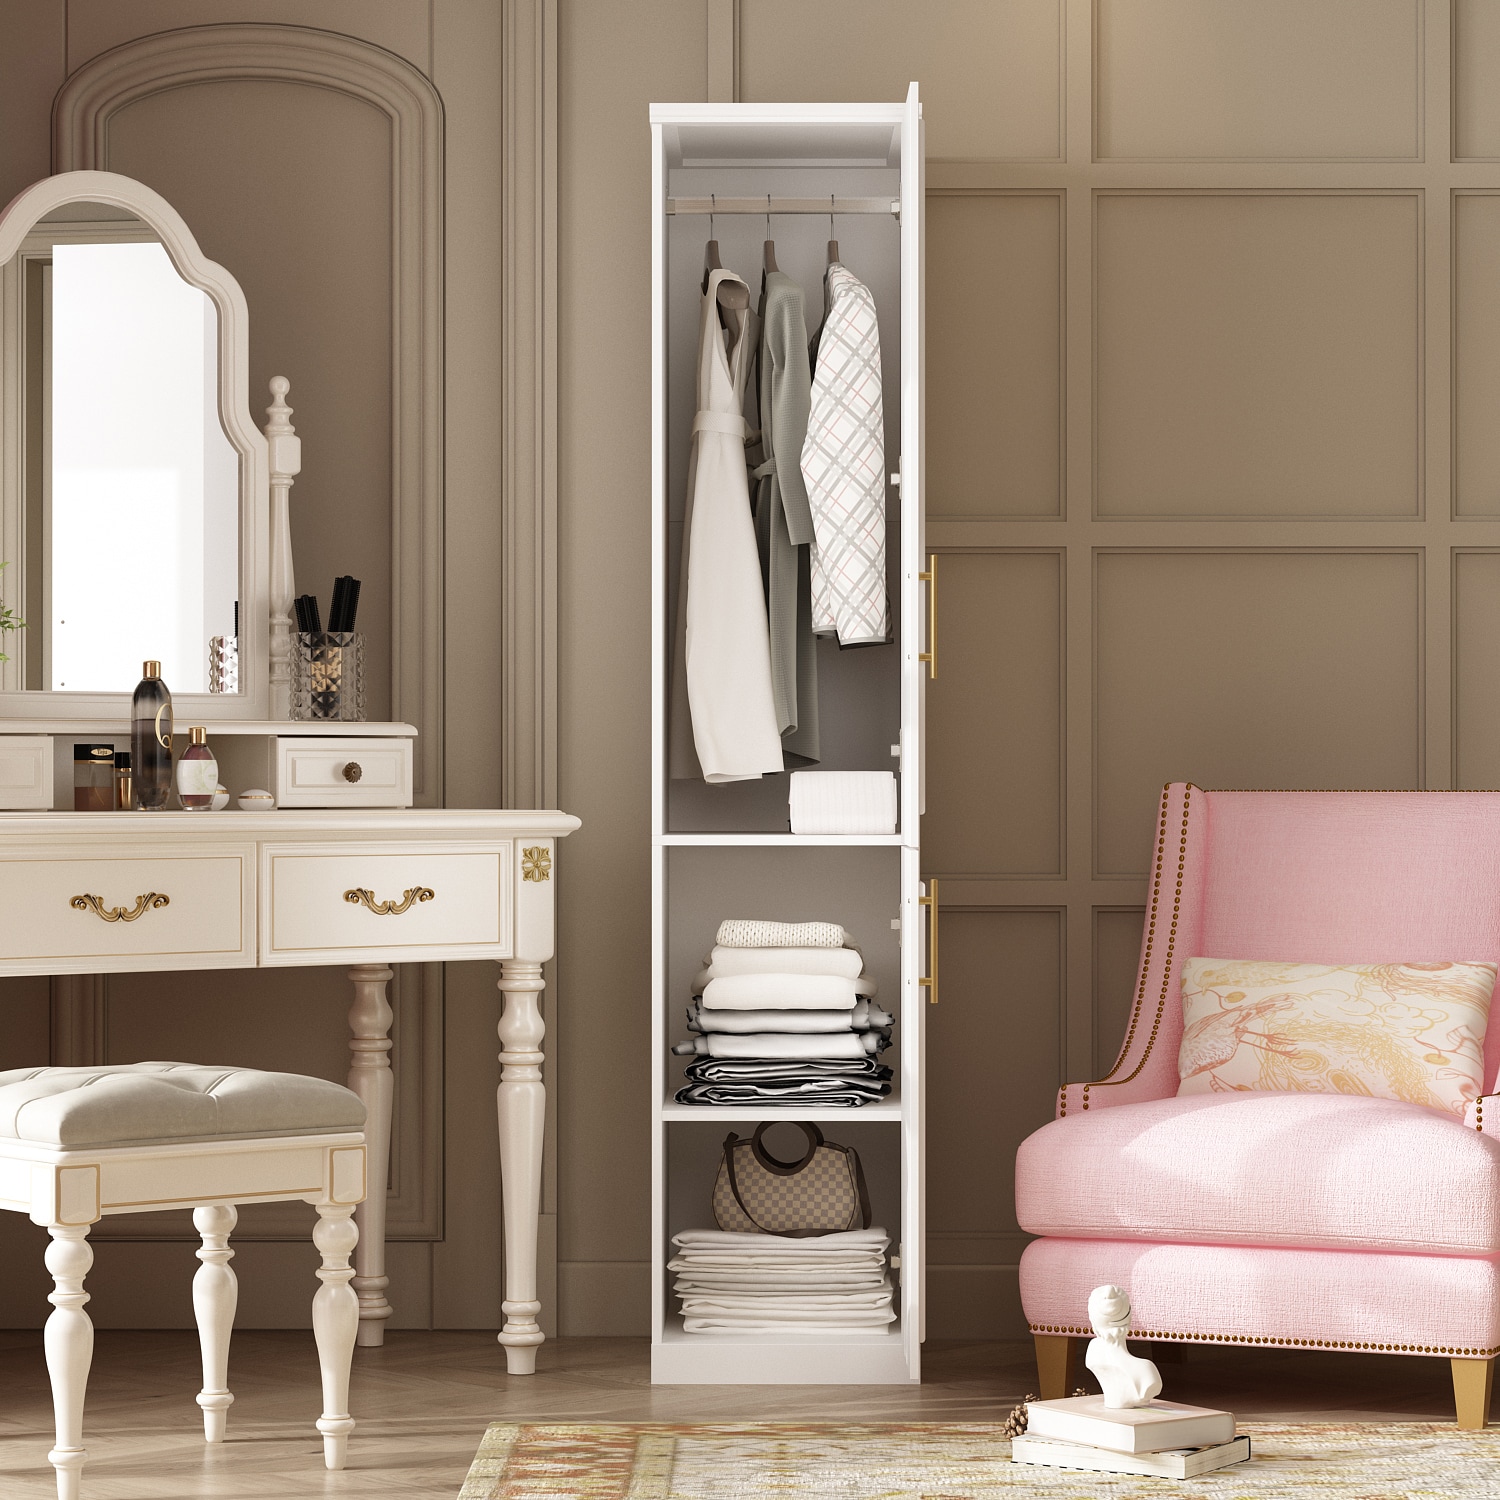 FUFU&GAGA White Armoire in the Armoires department at Lowes.com